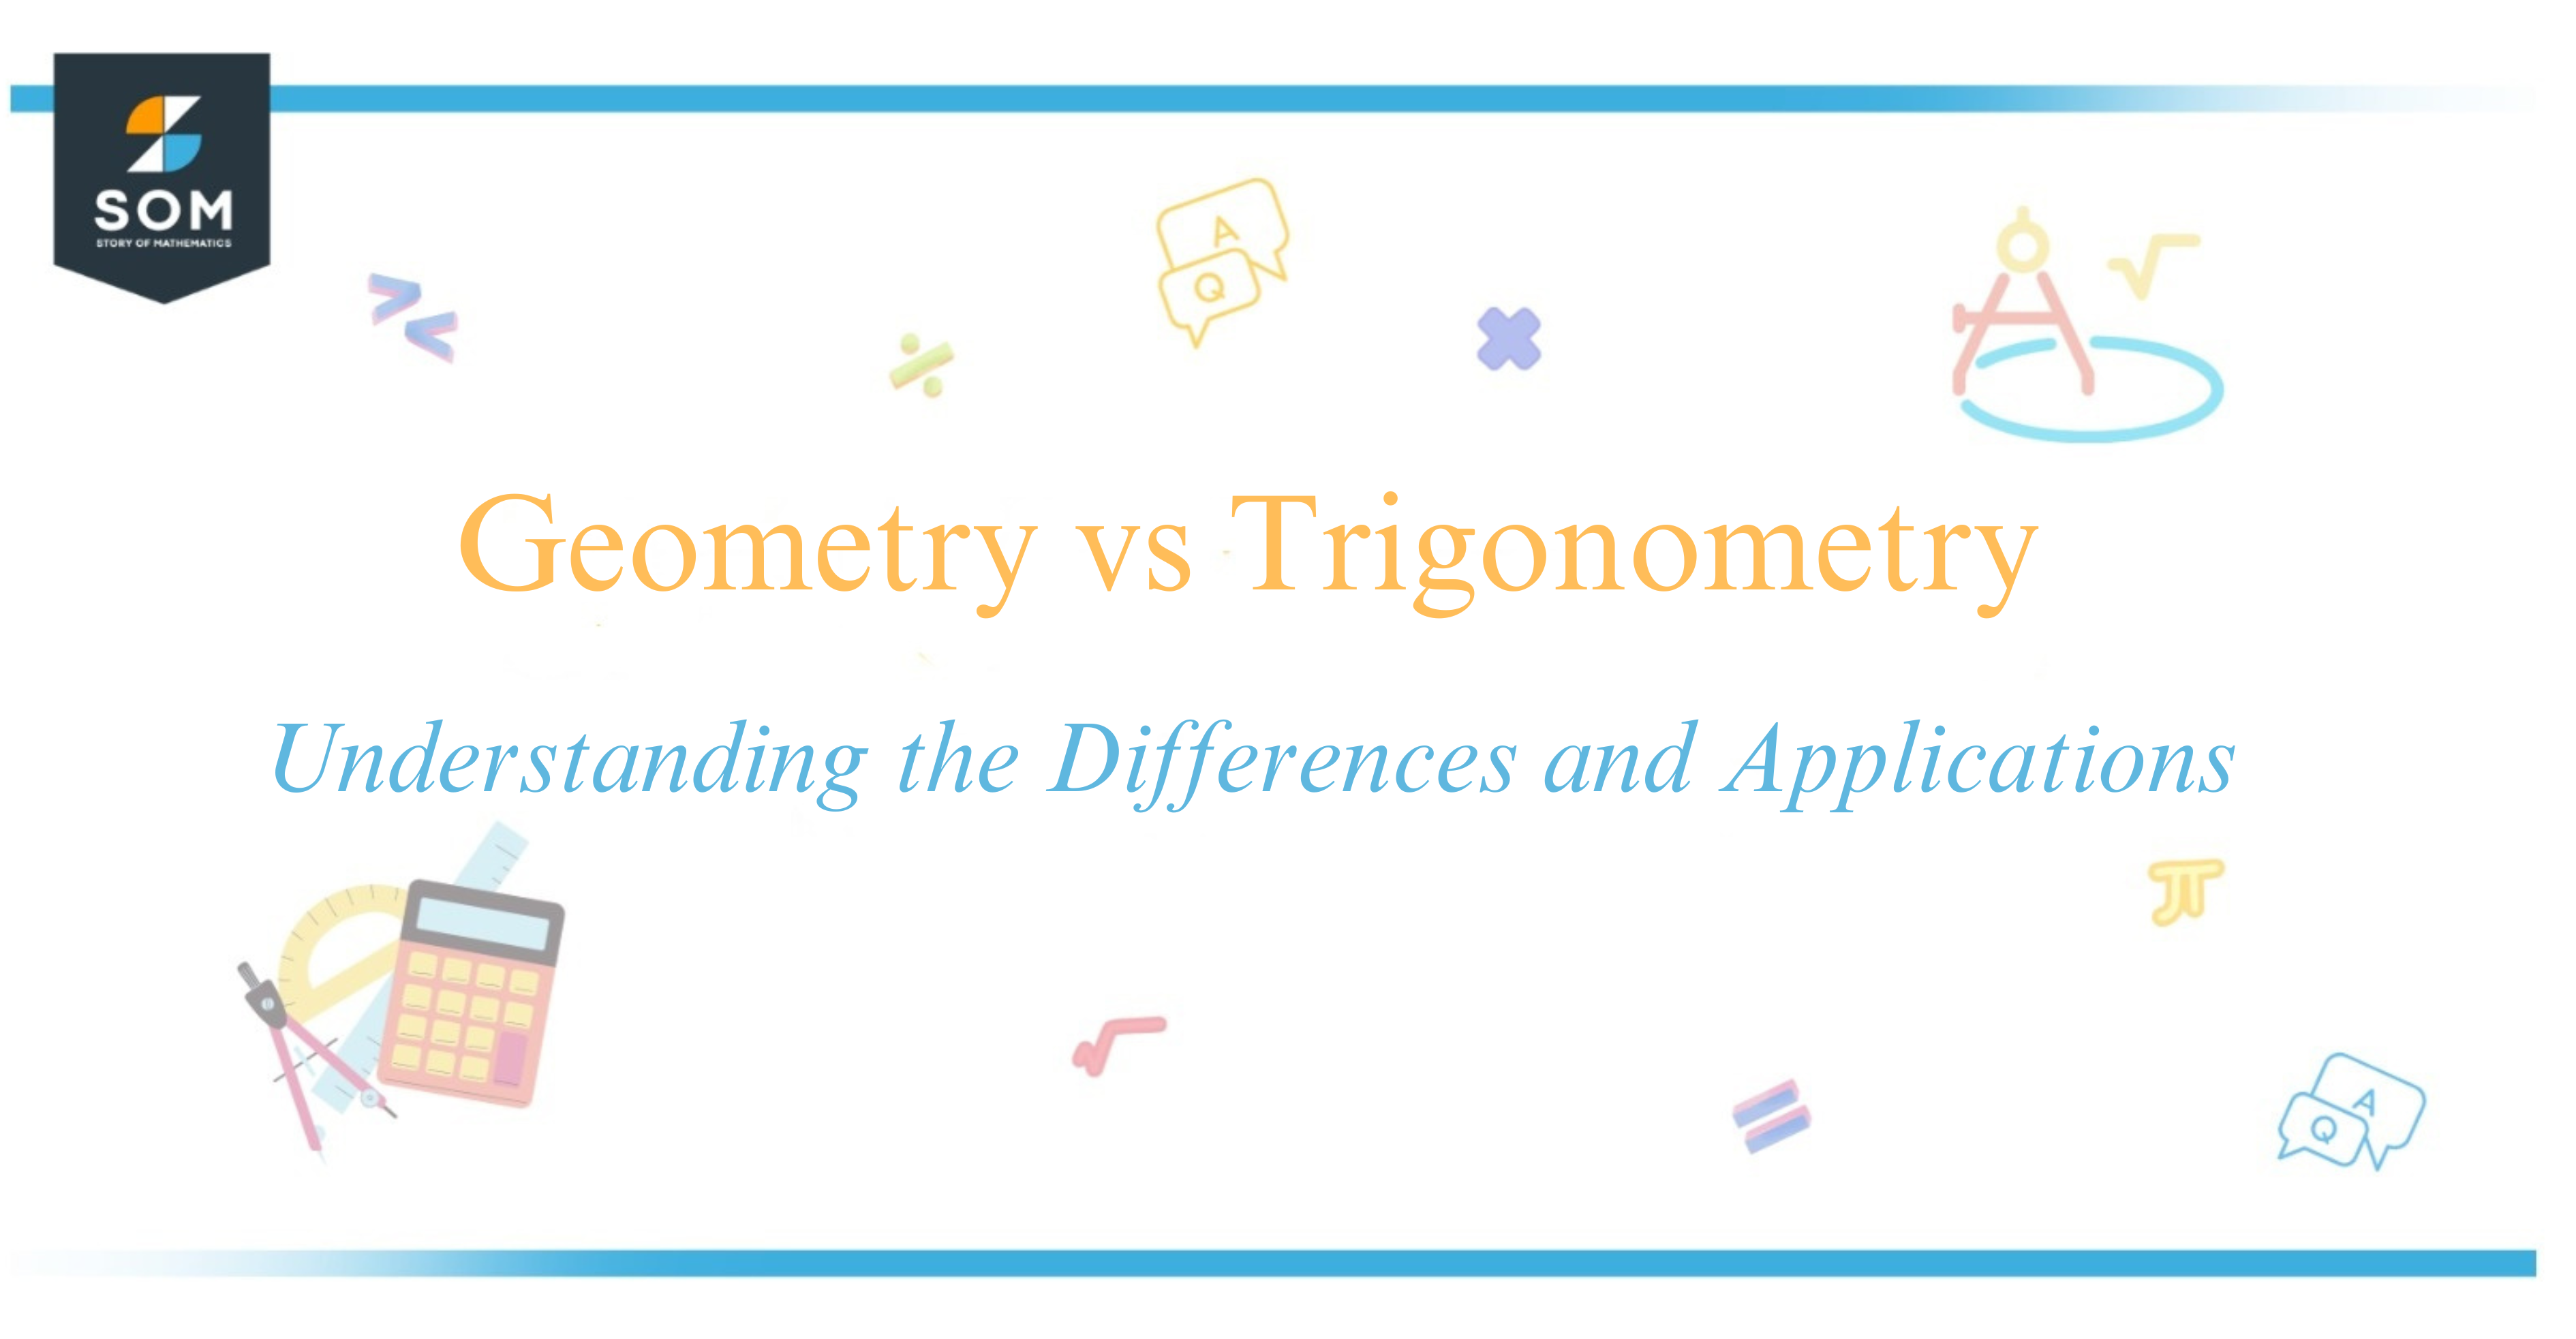 Geometry vs Trigonometry Understanding the Differences and Applications